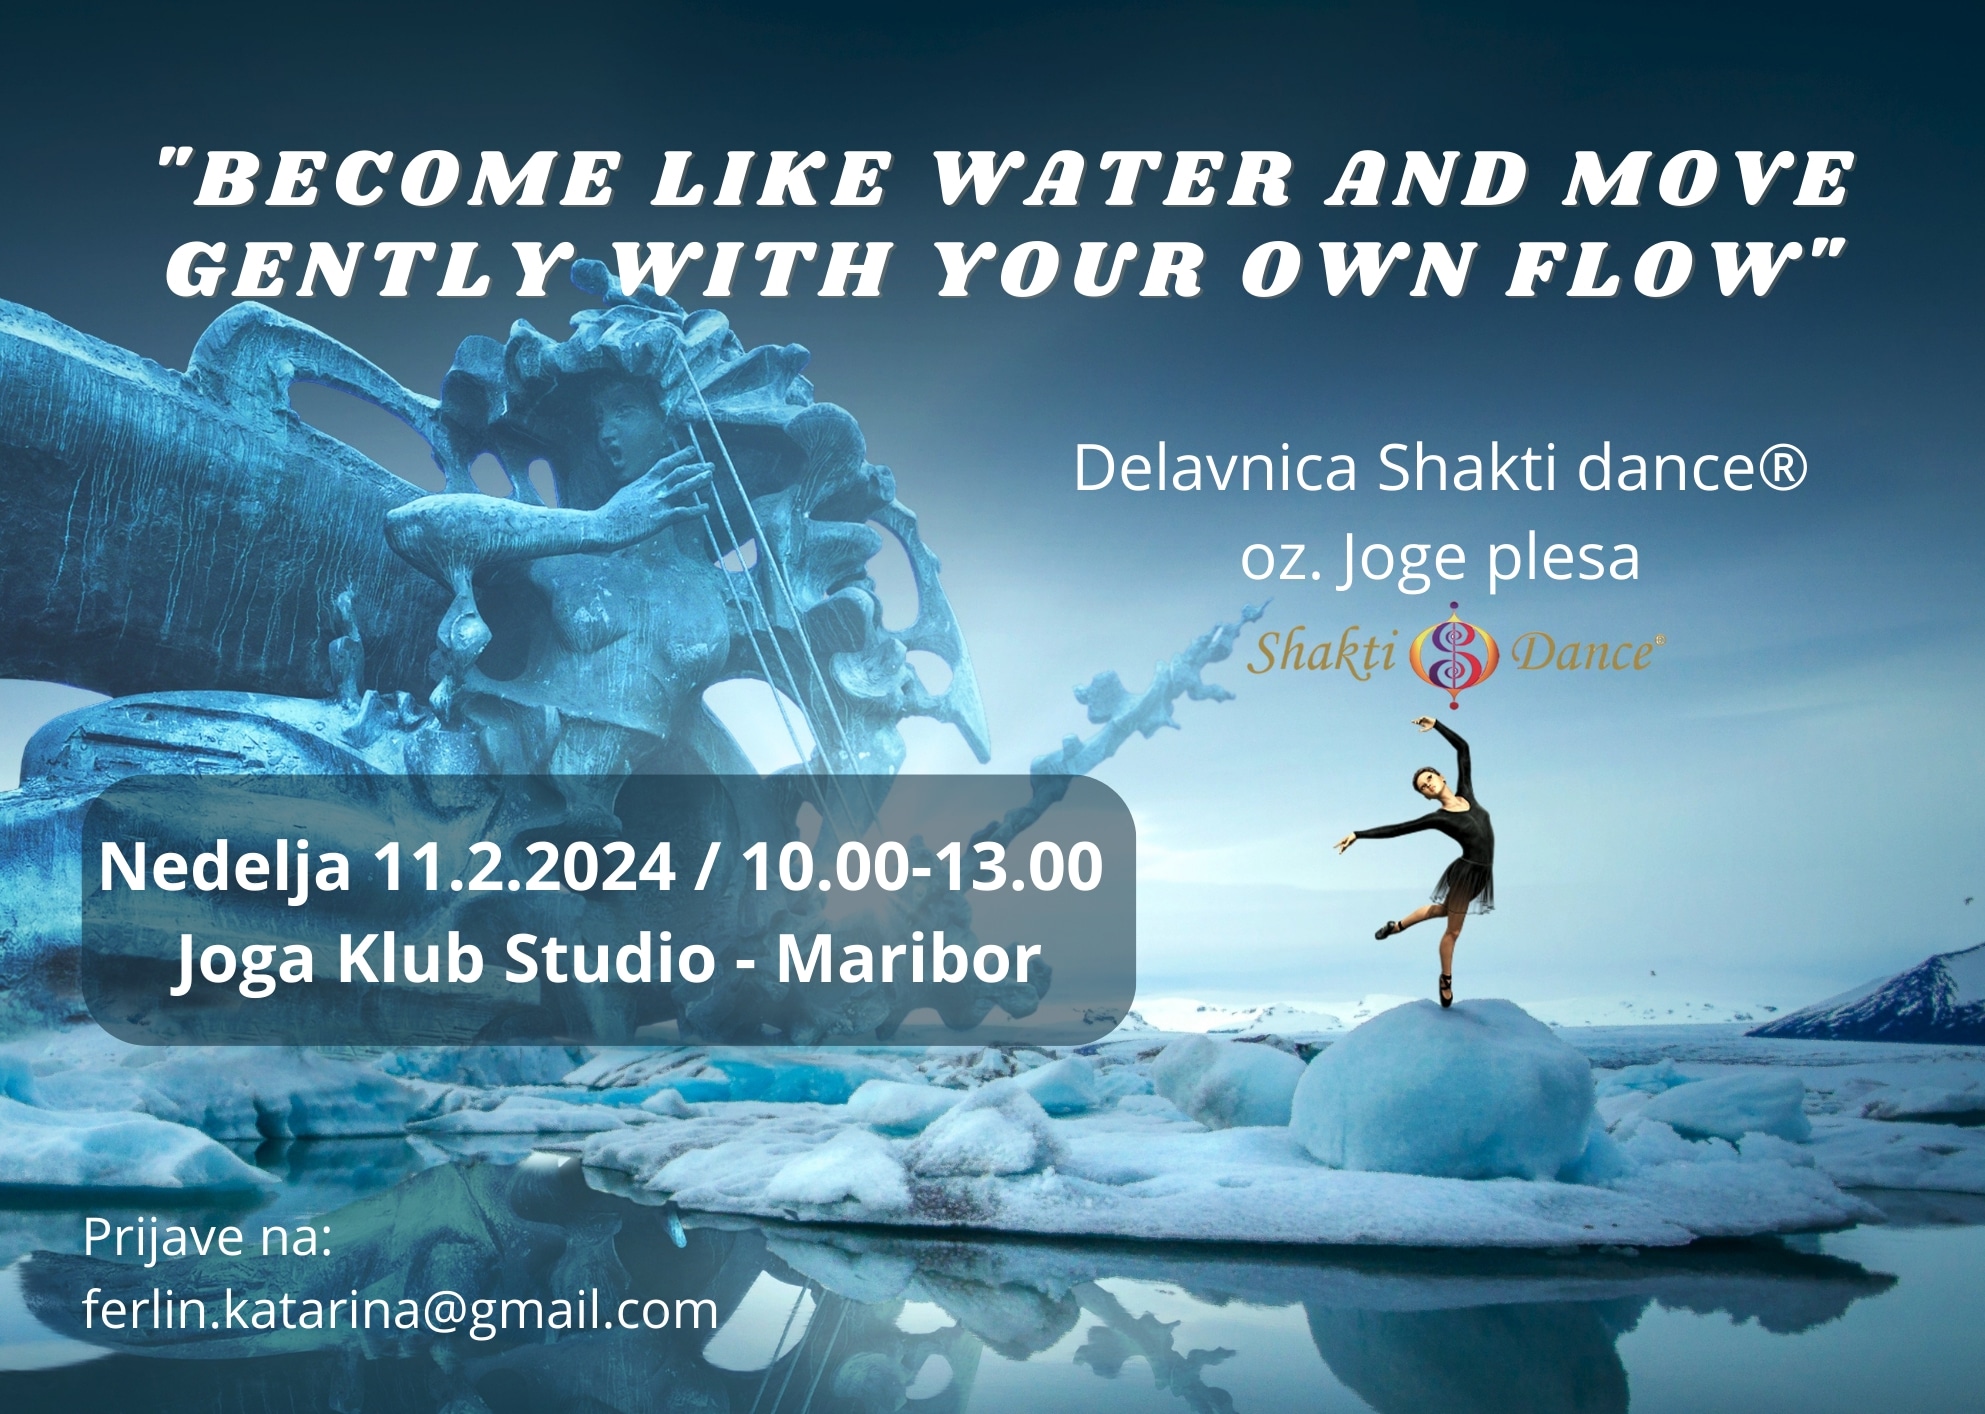 BECAME LIKE WATER AND MOVE GENTLY WITH YOUR OWN FLOW (Shakti dance) 7